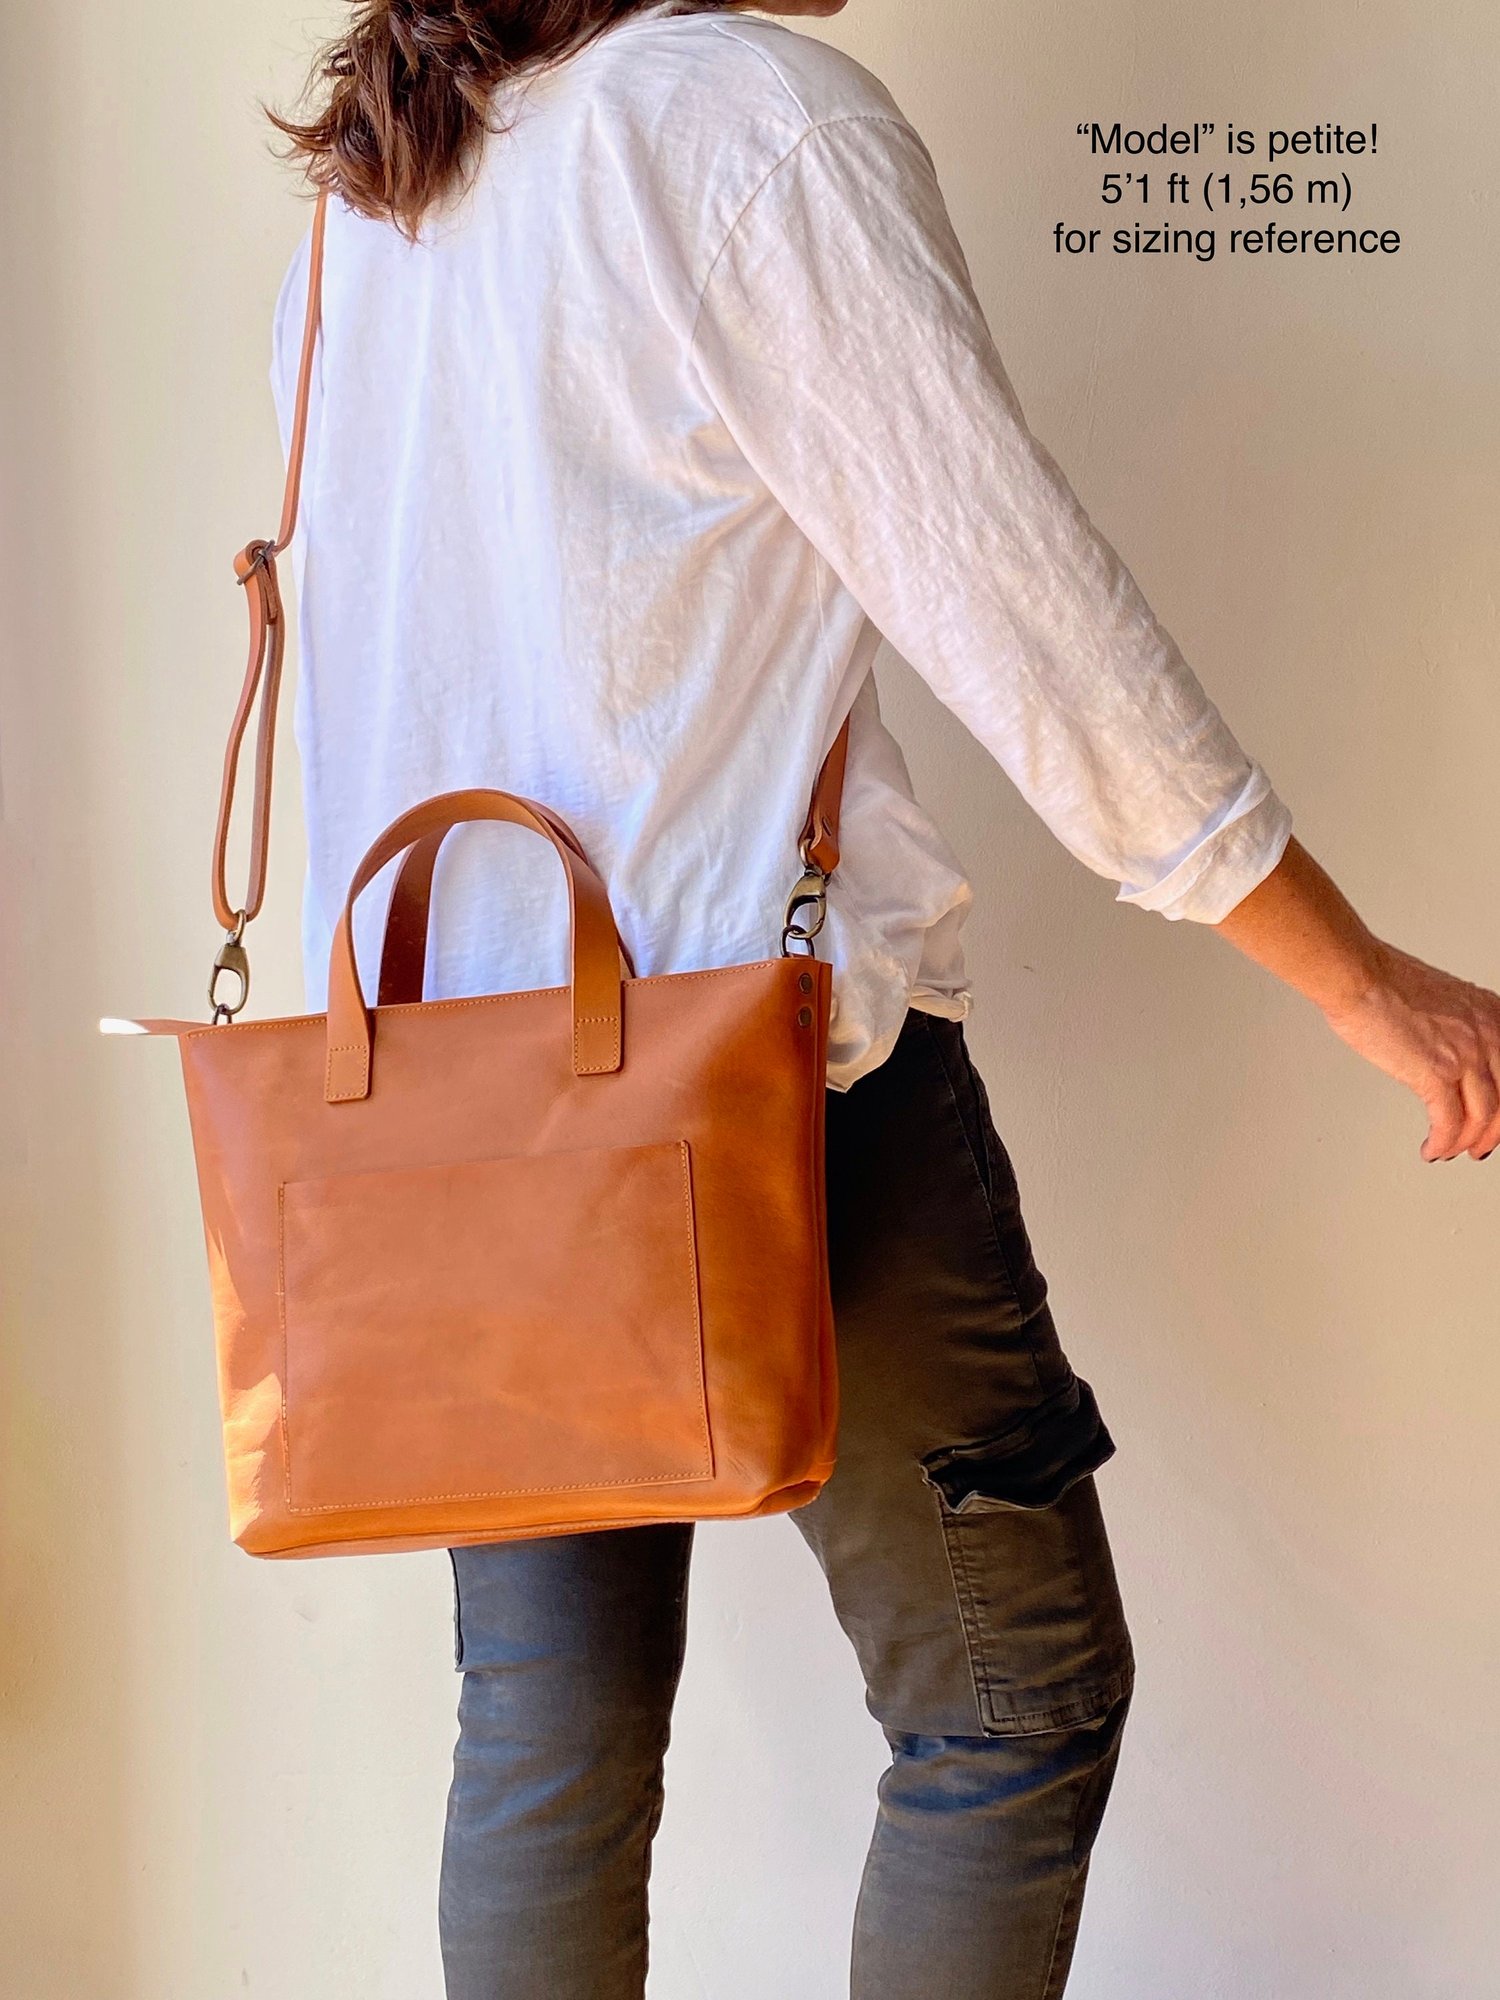 Top 5 Best Handmade Leather Bags